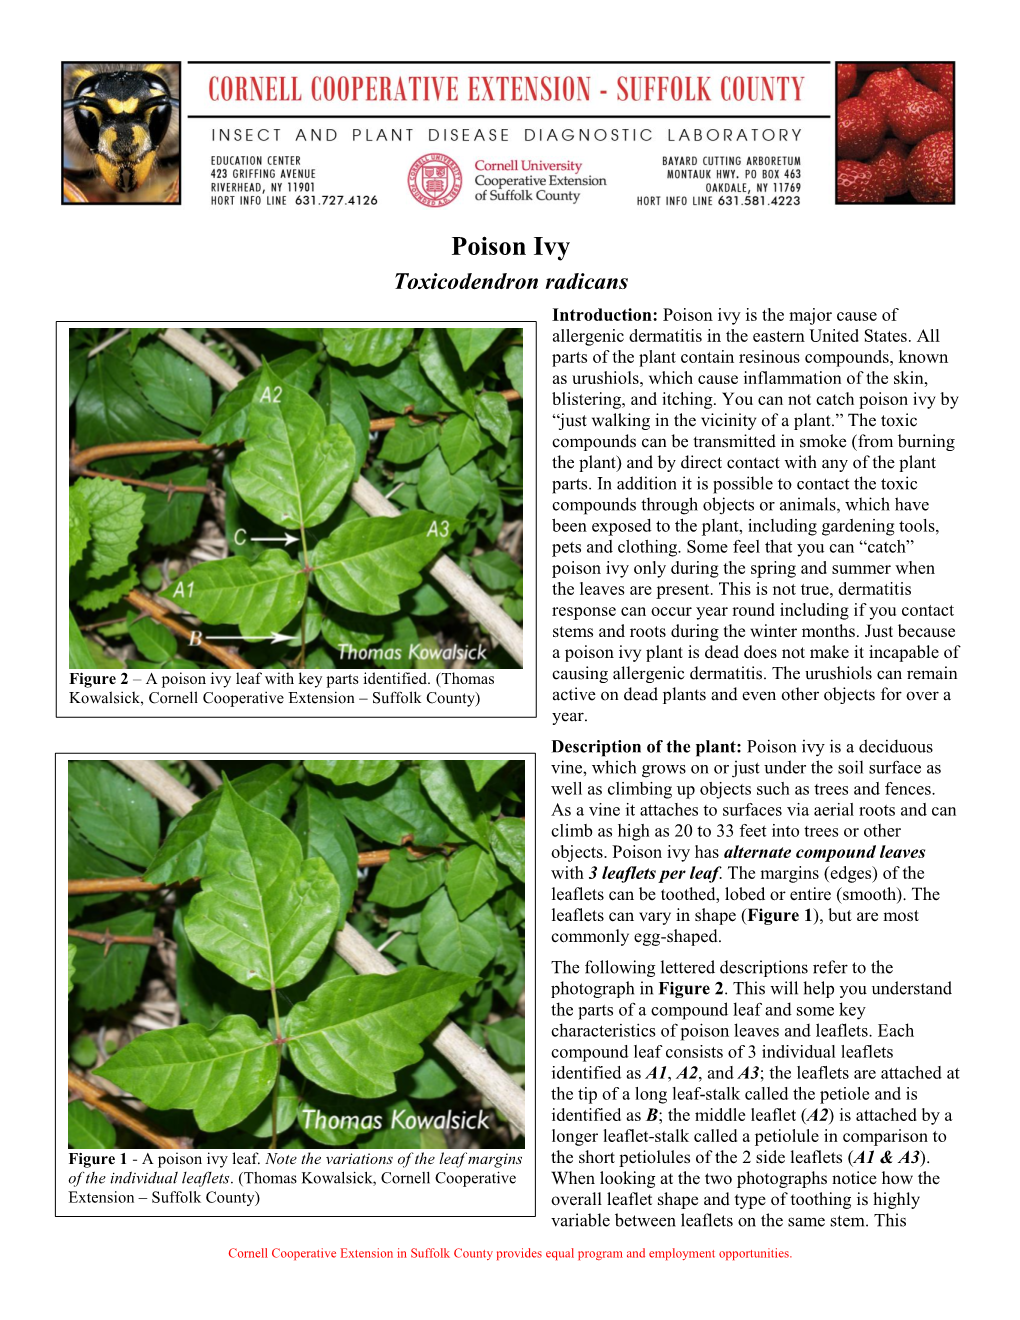 Poison Ivy Toxicodendron Radicans Introduction: Poison Ivy Is the Major Cause of Allergenic Dermatitis in the Eastern United States